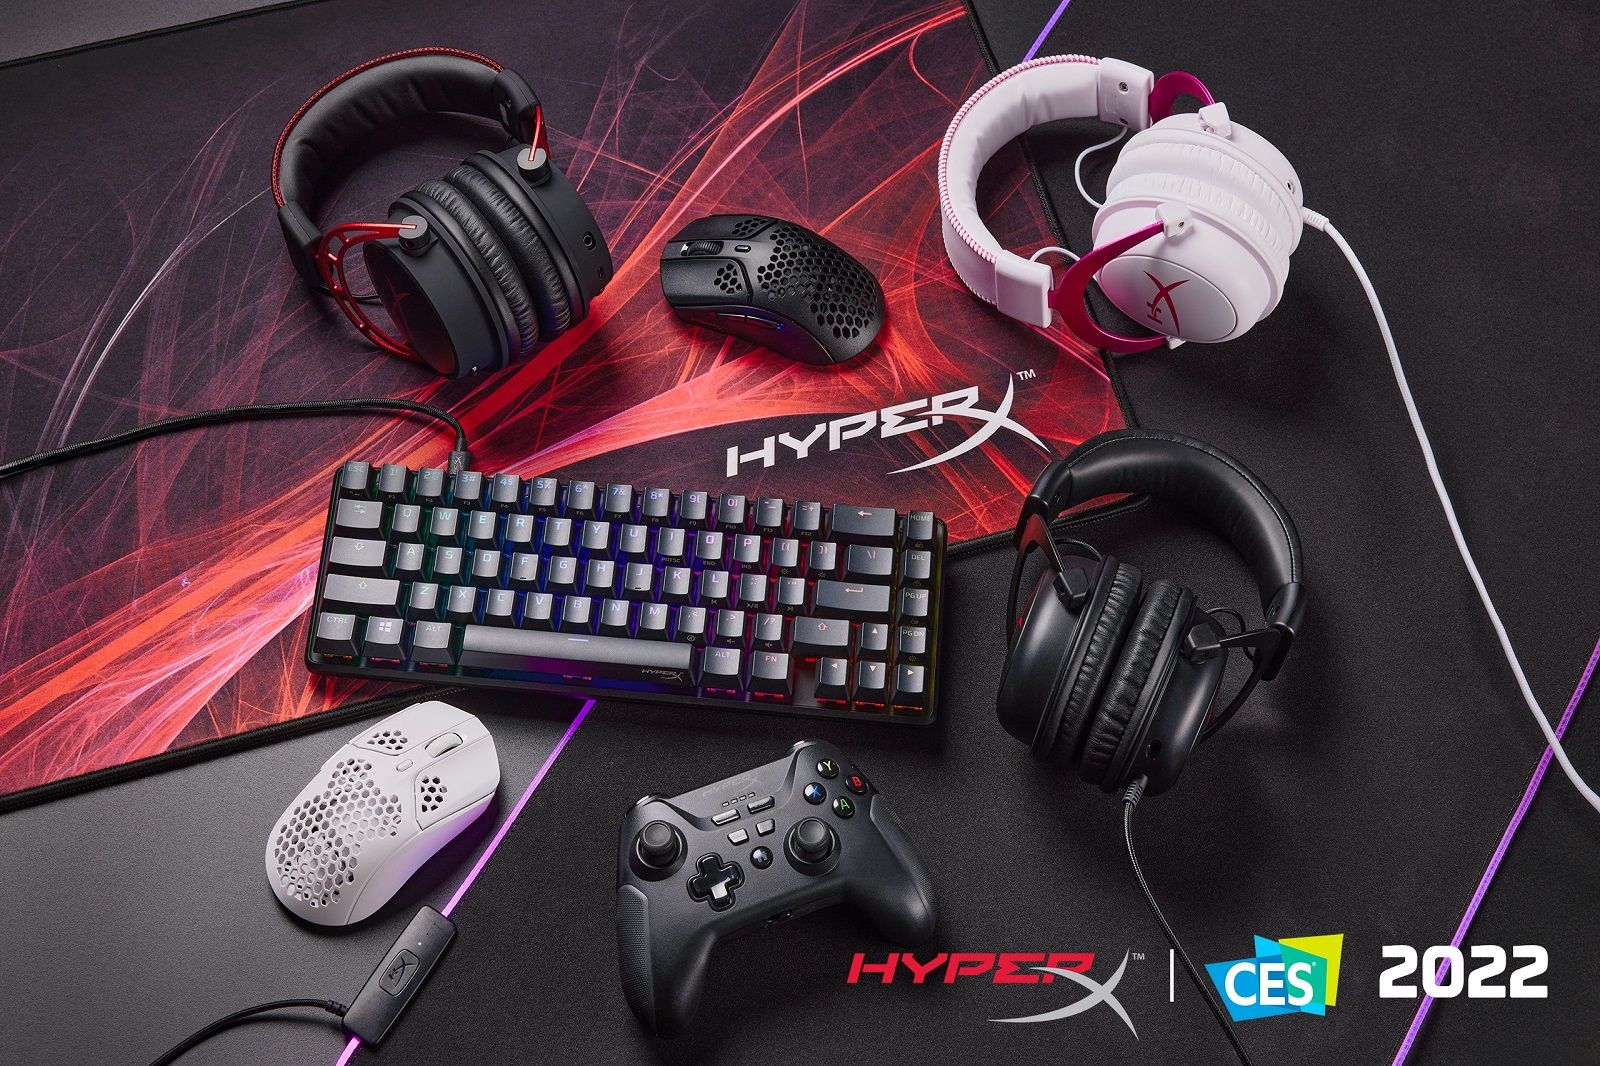 HyperX has revealed a whole bunch of awesome new peripherals photo 1